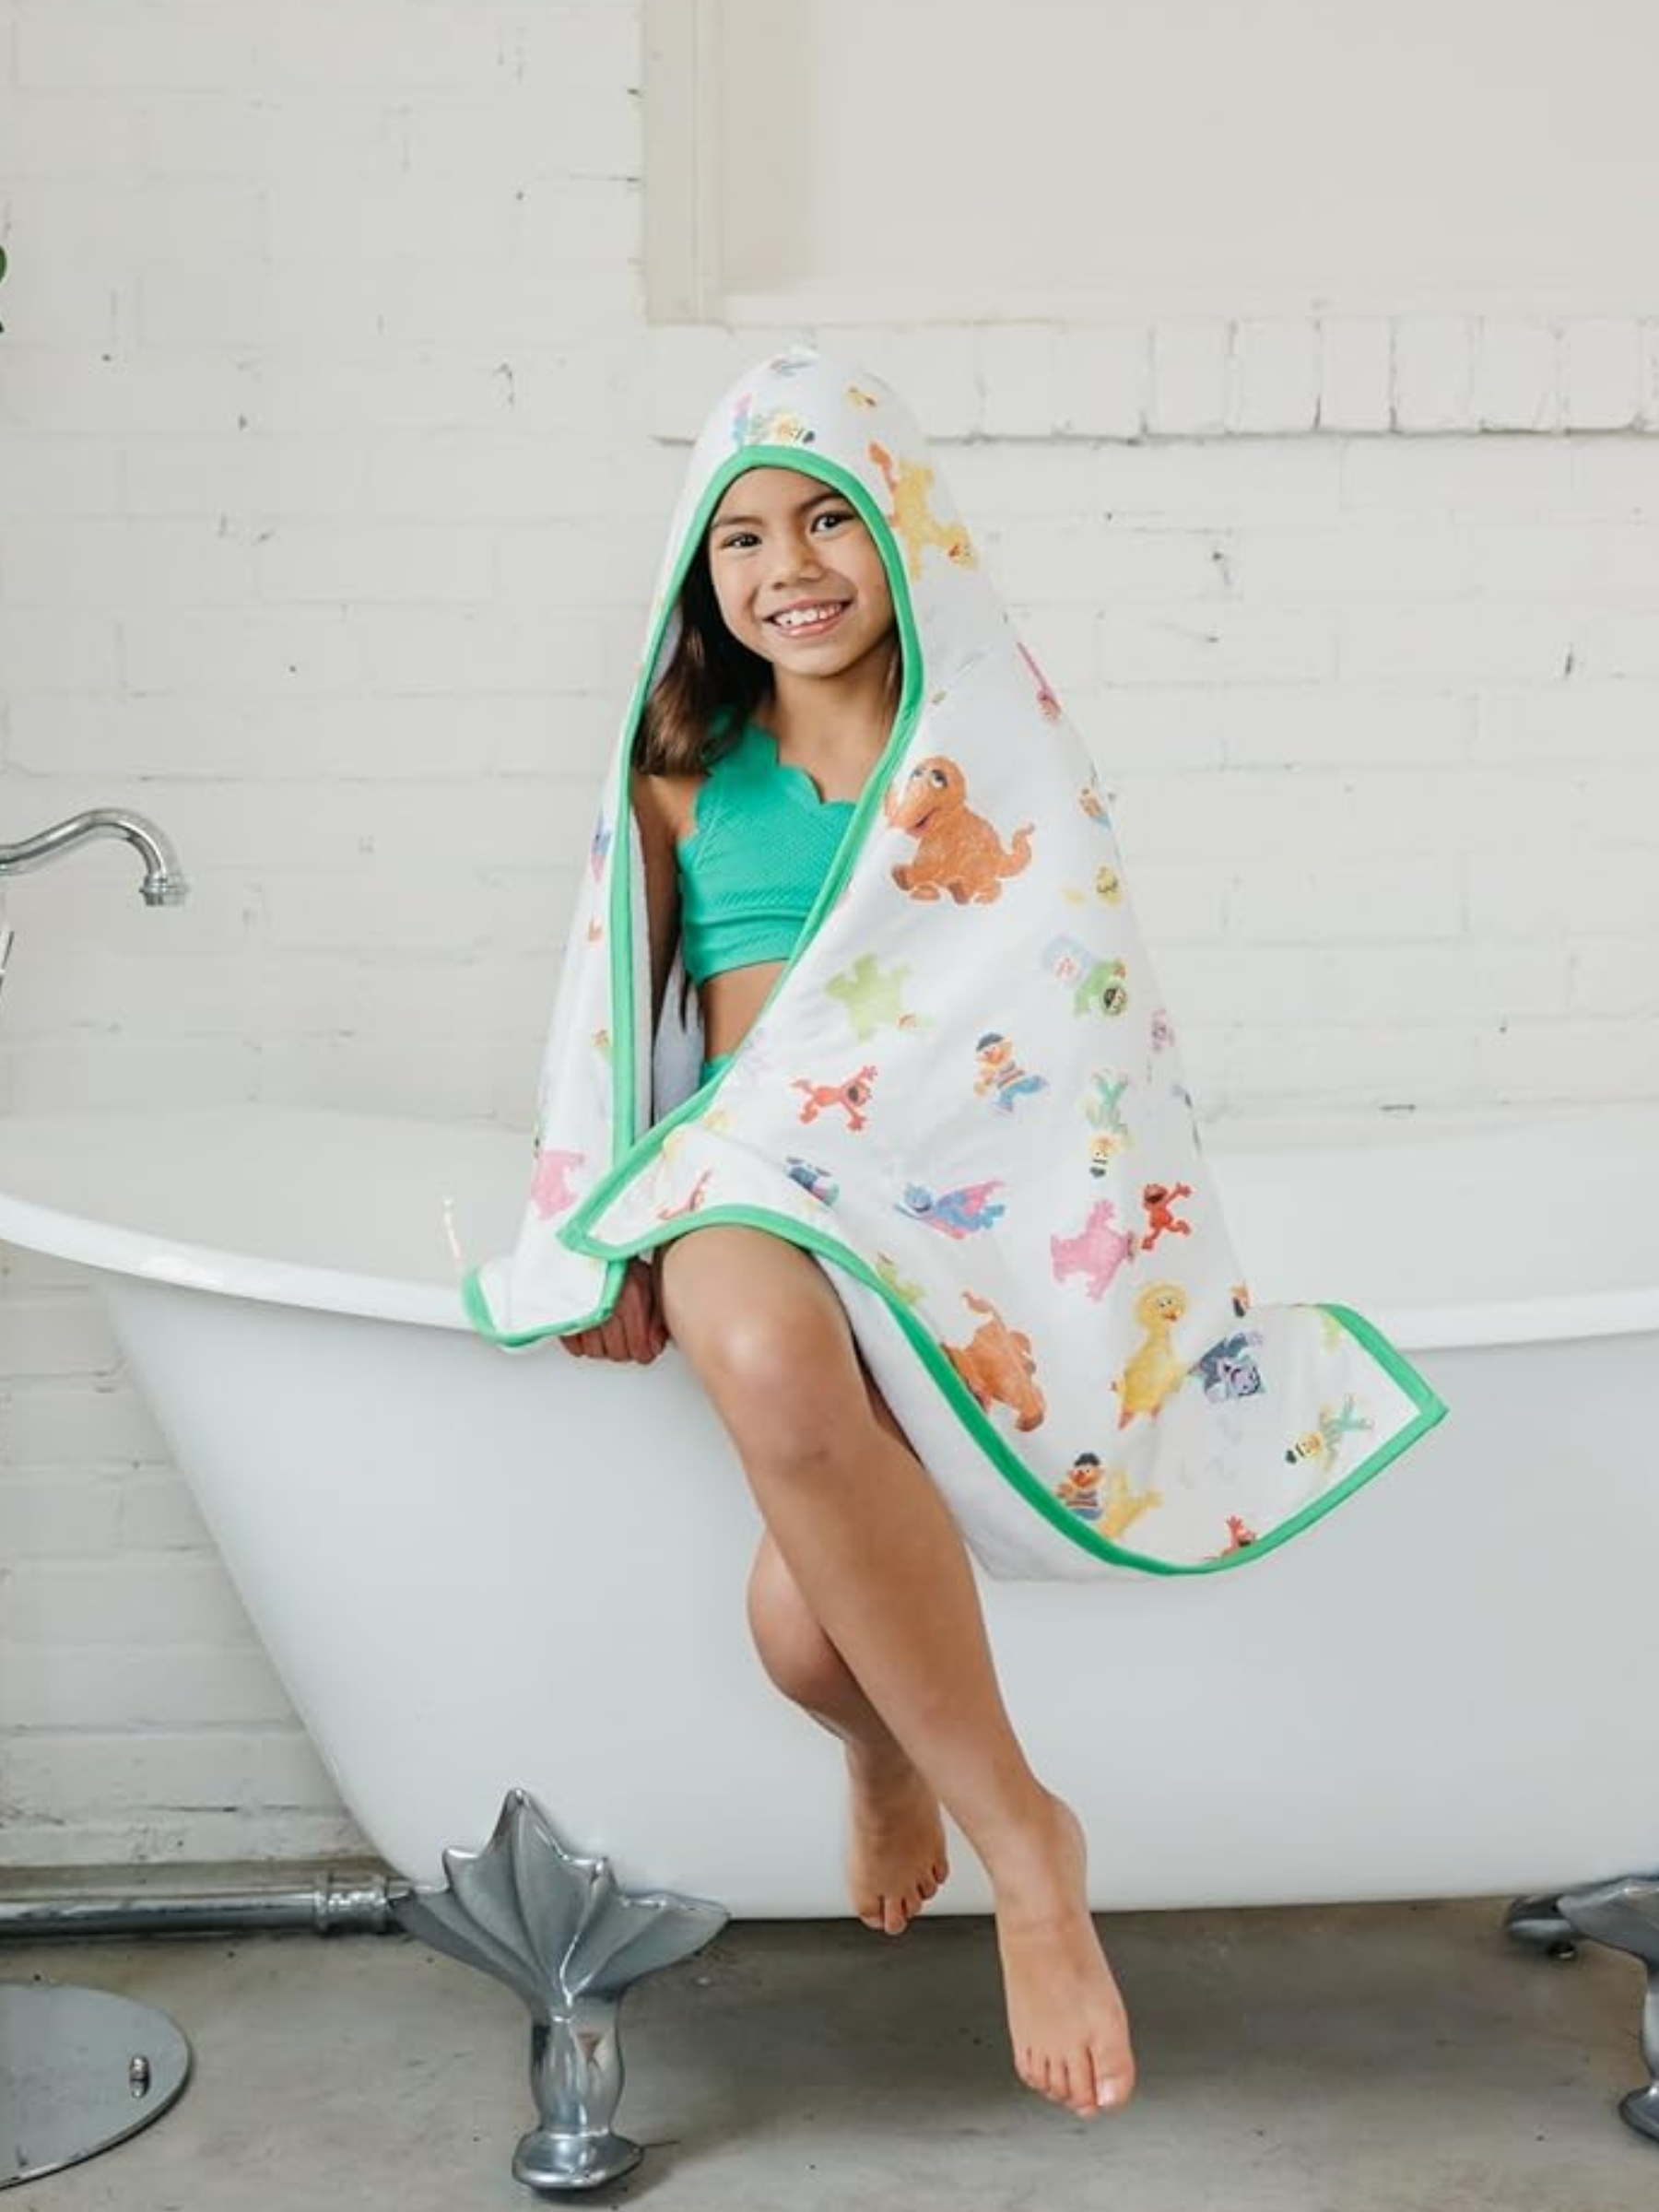 <p>This luxury hooded towel from Copper Pearl is meant to last from toddlerhood and beyond. Its thick and plush and comes in a variety of chic designs.</p> <p><strong>What our expert says:</strong> You’ve heard that kids grow out of their clothes and their shoes, but it never occurred to me that my daughter would start growing out of her towels. Alas, a bigger hooded towel is one of those things I found myself needing once I realized the oh-so-cute ones from our baby shower were barely covering her up anymore. I love Copper Pearl's towels for how soft and cozy they are. <em>-SM</em></p> $43, Amazon. <a href="https://www.amazon.com/Copper-Pearl-Premium-Hooded-Towel/dp/B0BQCVYL6R/ref=sr_1_2?">Get it now!</a><p>Sign up for today’s biggest stories, from pop culture to politics.</p><a href="https://www.glamour.com/newsletter/news?sourceCode=msnsend">Sign Up</a>